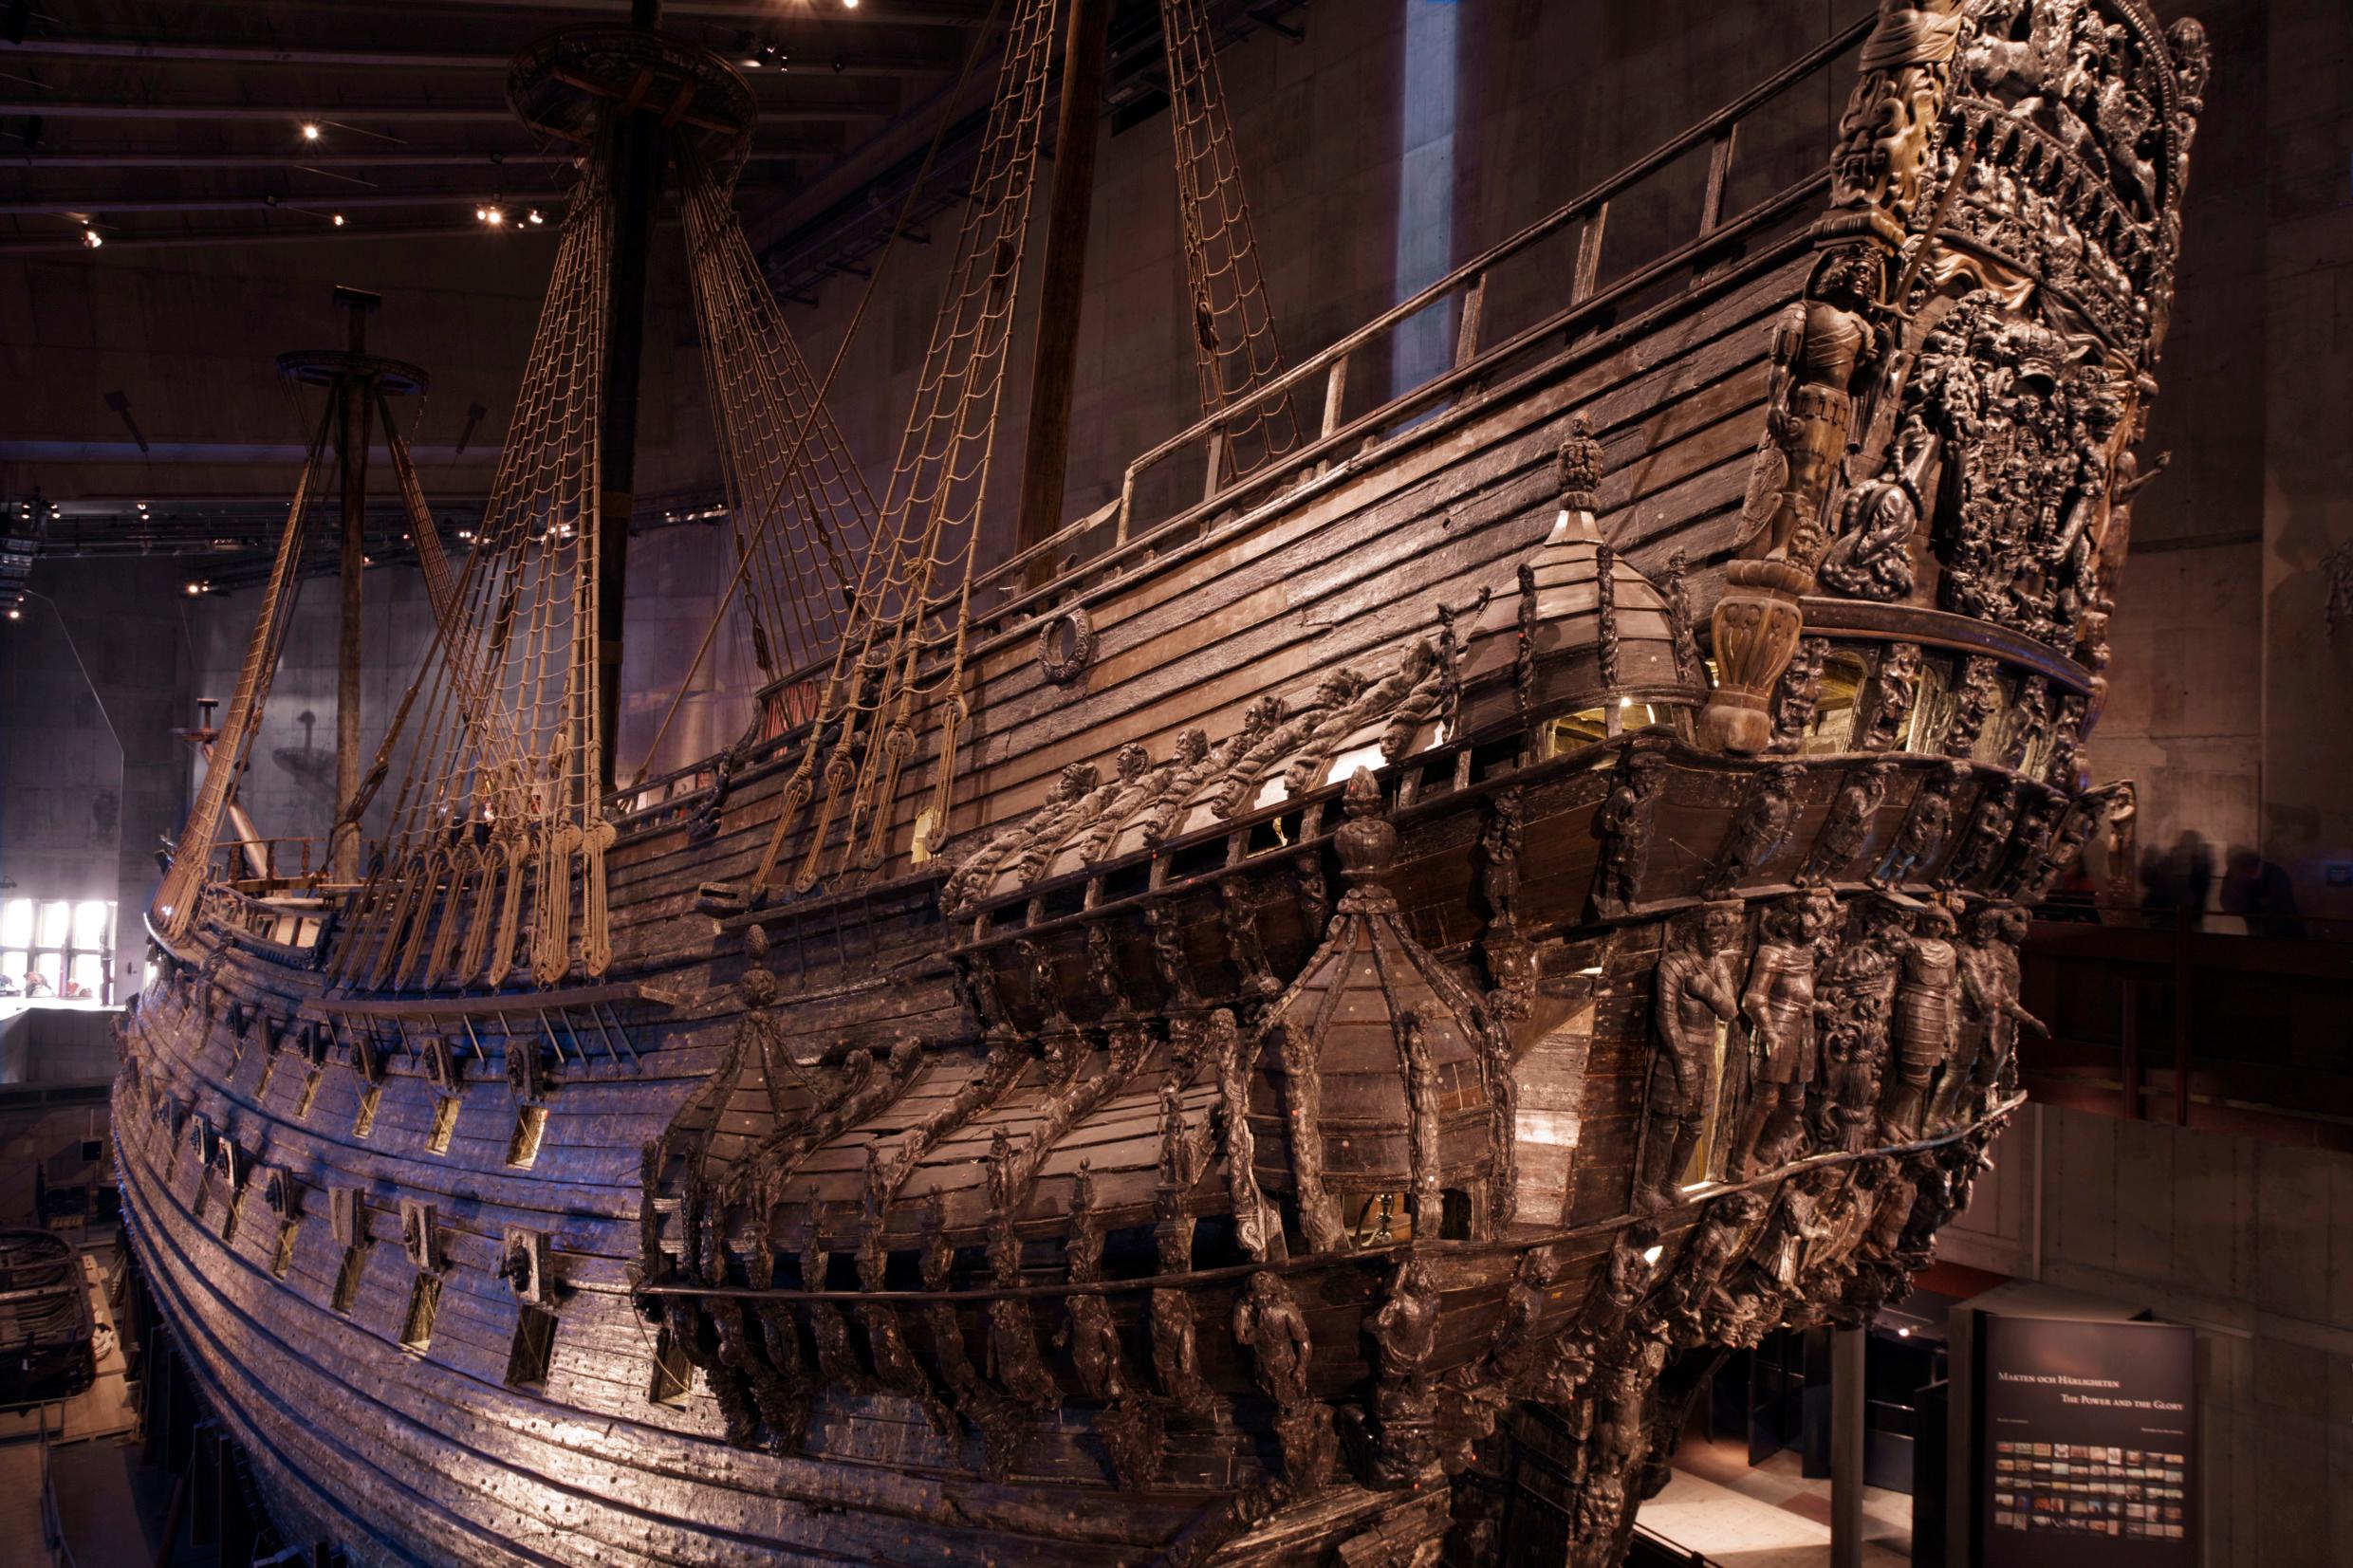 The 17th century warship Wasa propped up inside a museum.